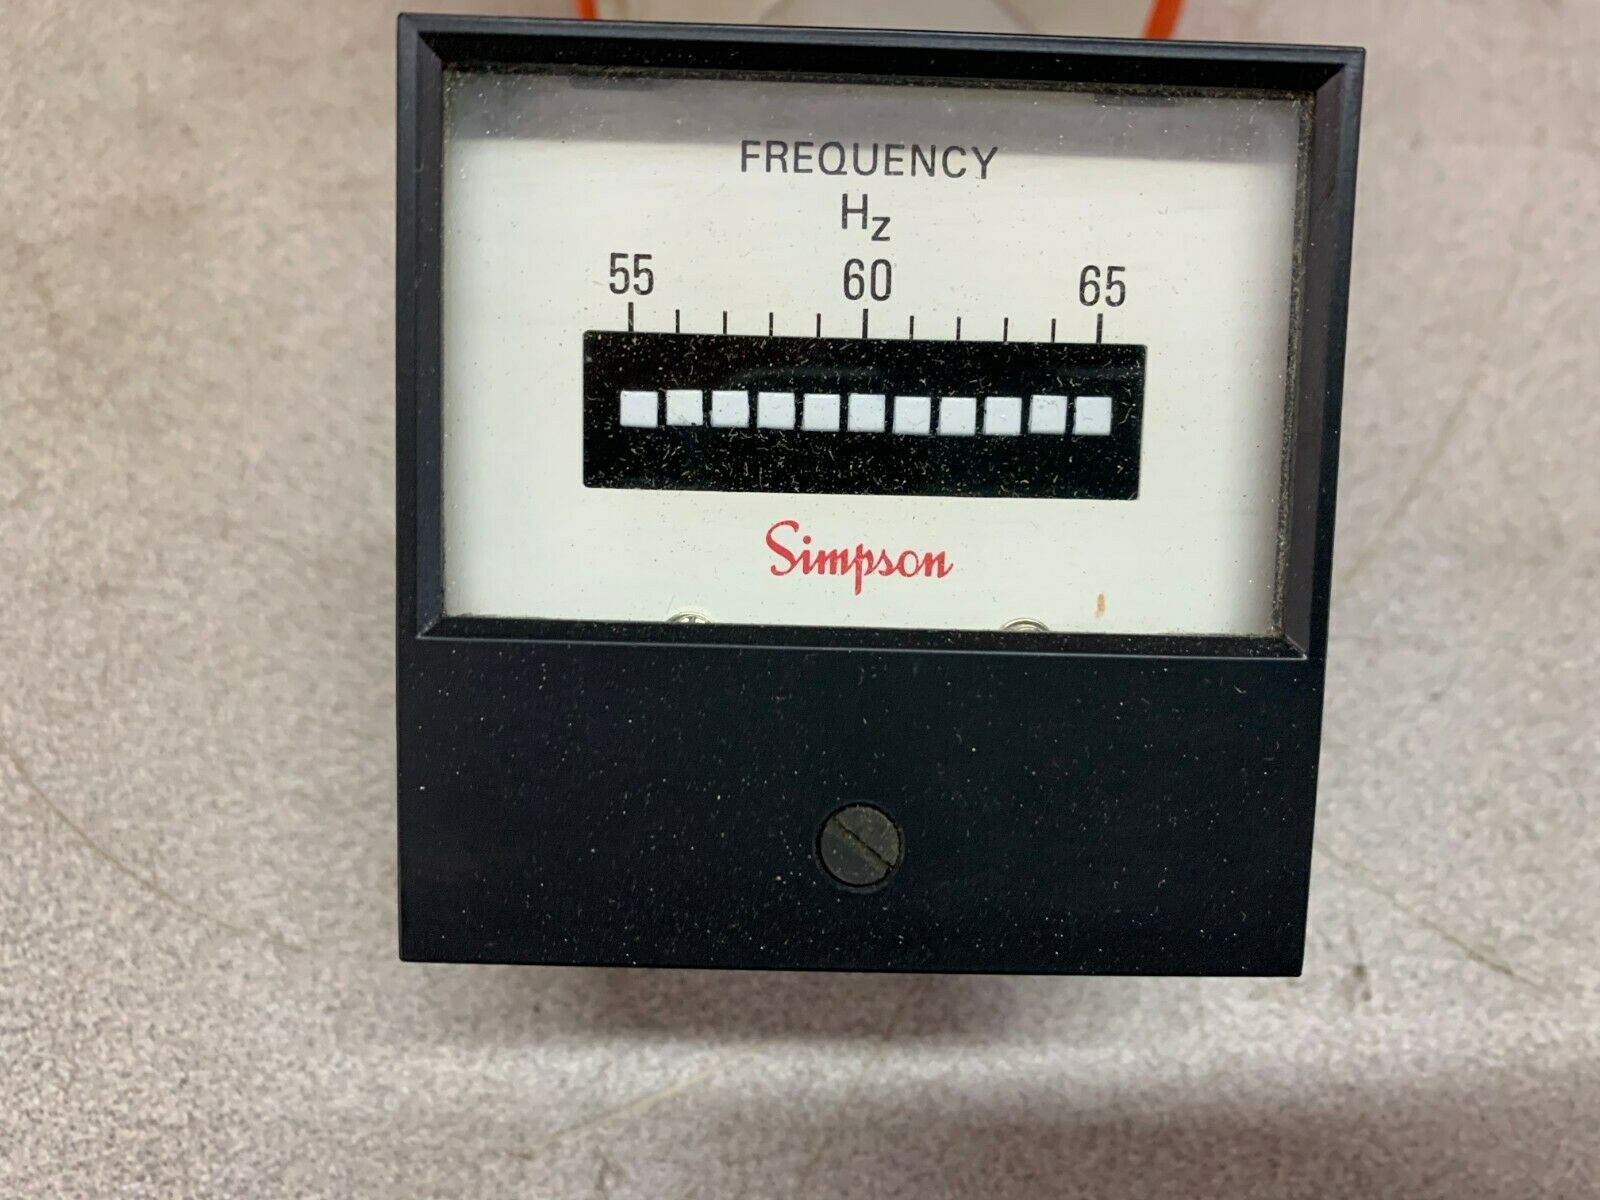 NEW IN BOX SIMPSON FREQUENCY METER 03496